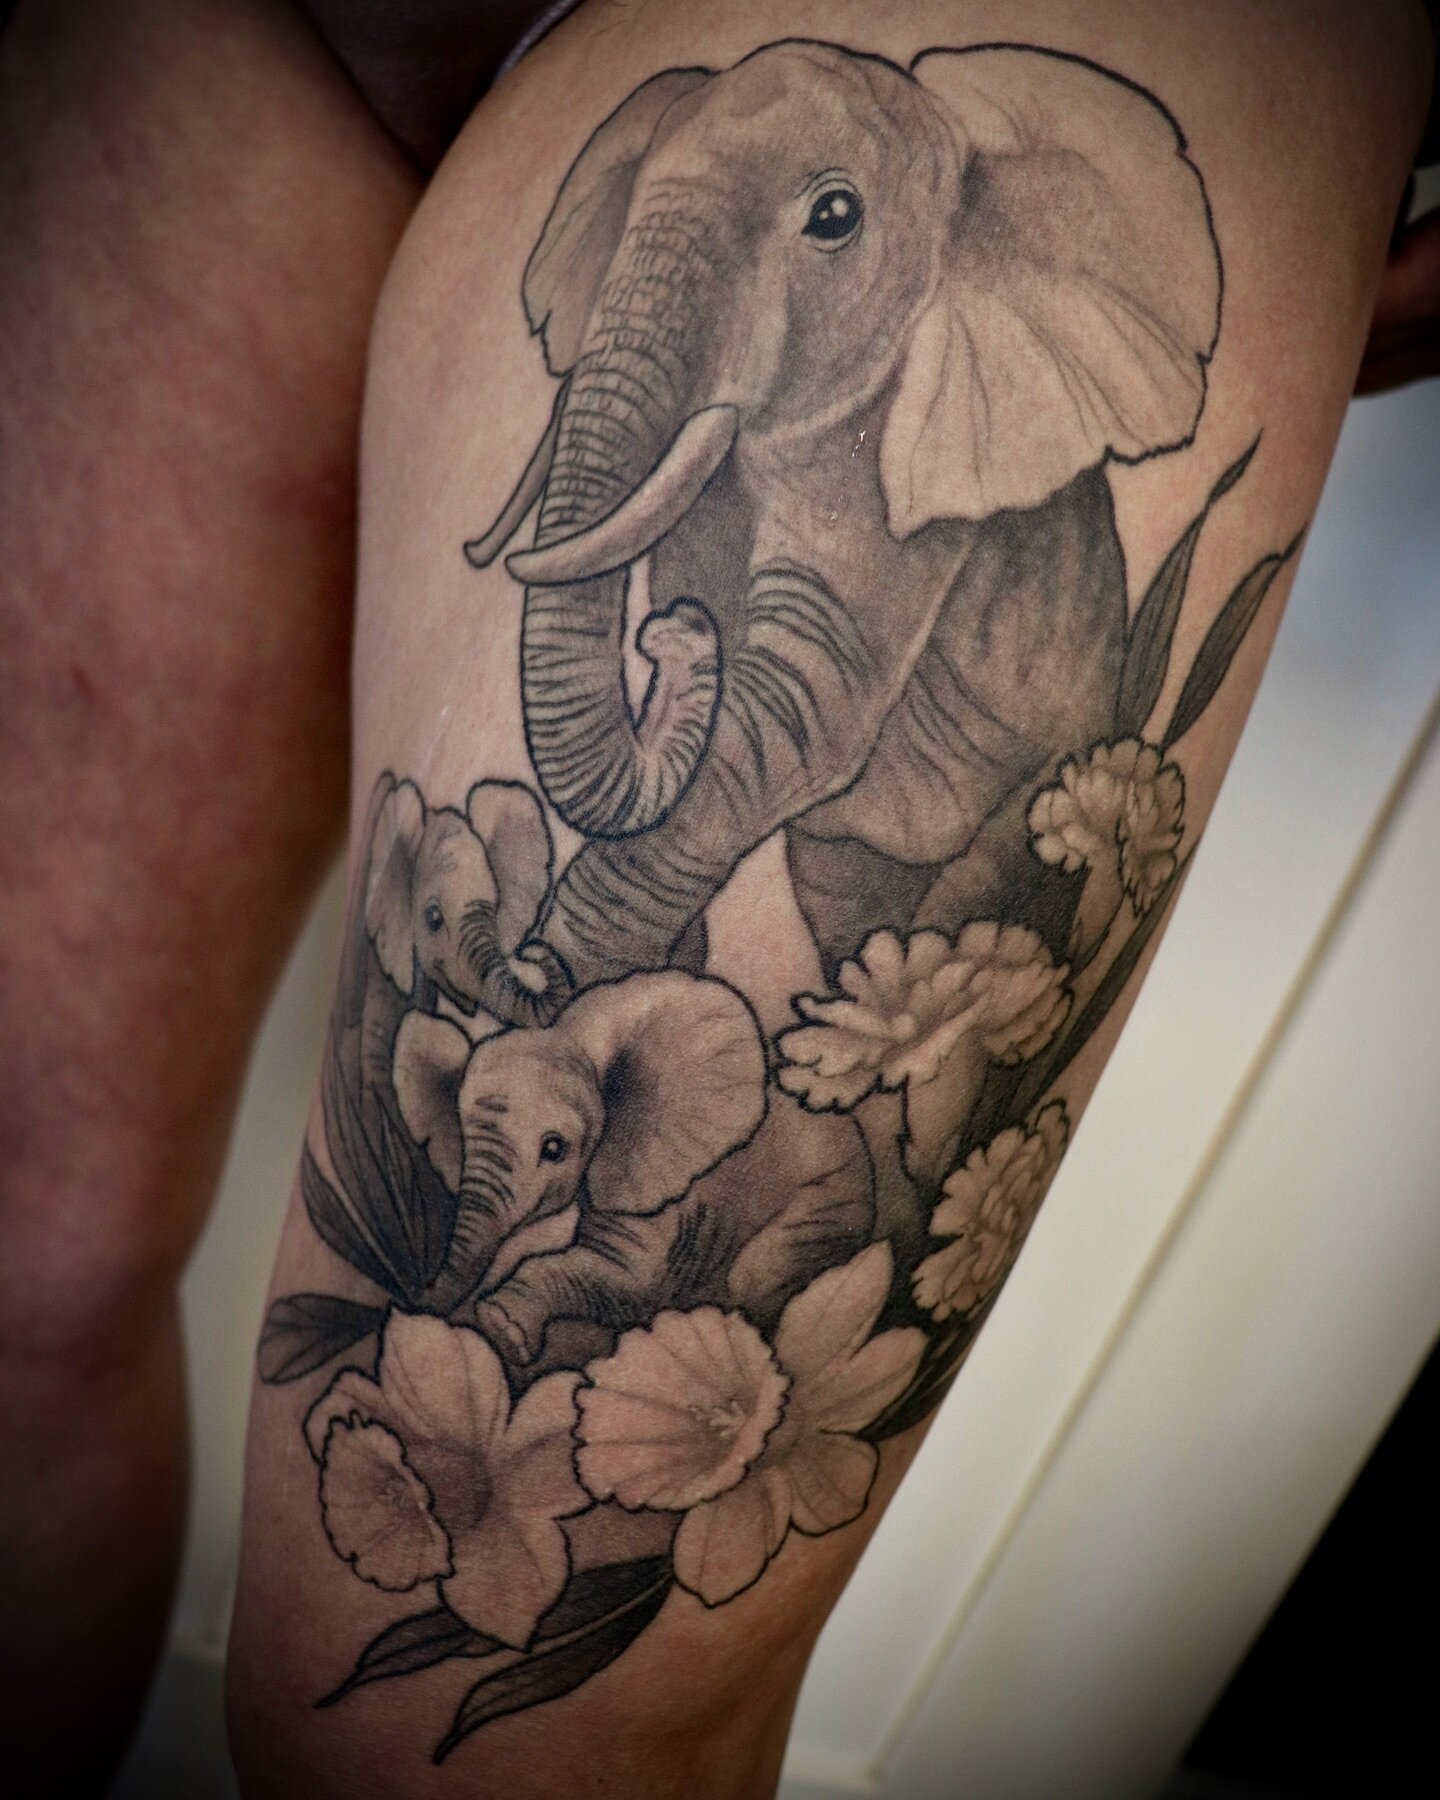 Healed Elephant fam 🐘 Would love to make some more animal tattoos and love working in black and grey. Submission form is in Link in bio or my website ❣️ Www.lexiraetattoo.com. 
@yyc.tattoos 
.
.

#calgarytattoos #calgarytattooartist #calgarytattoo #